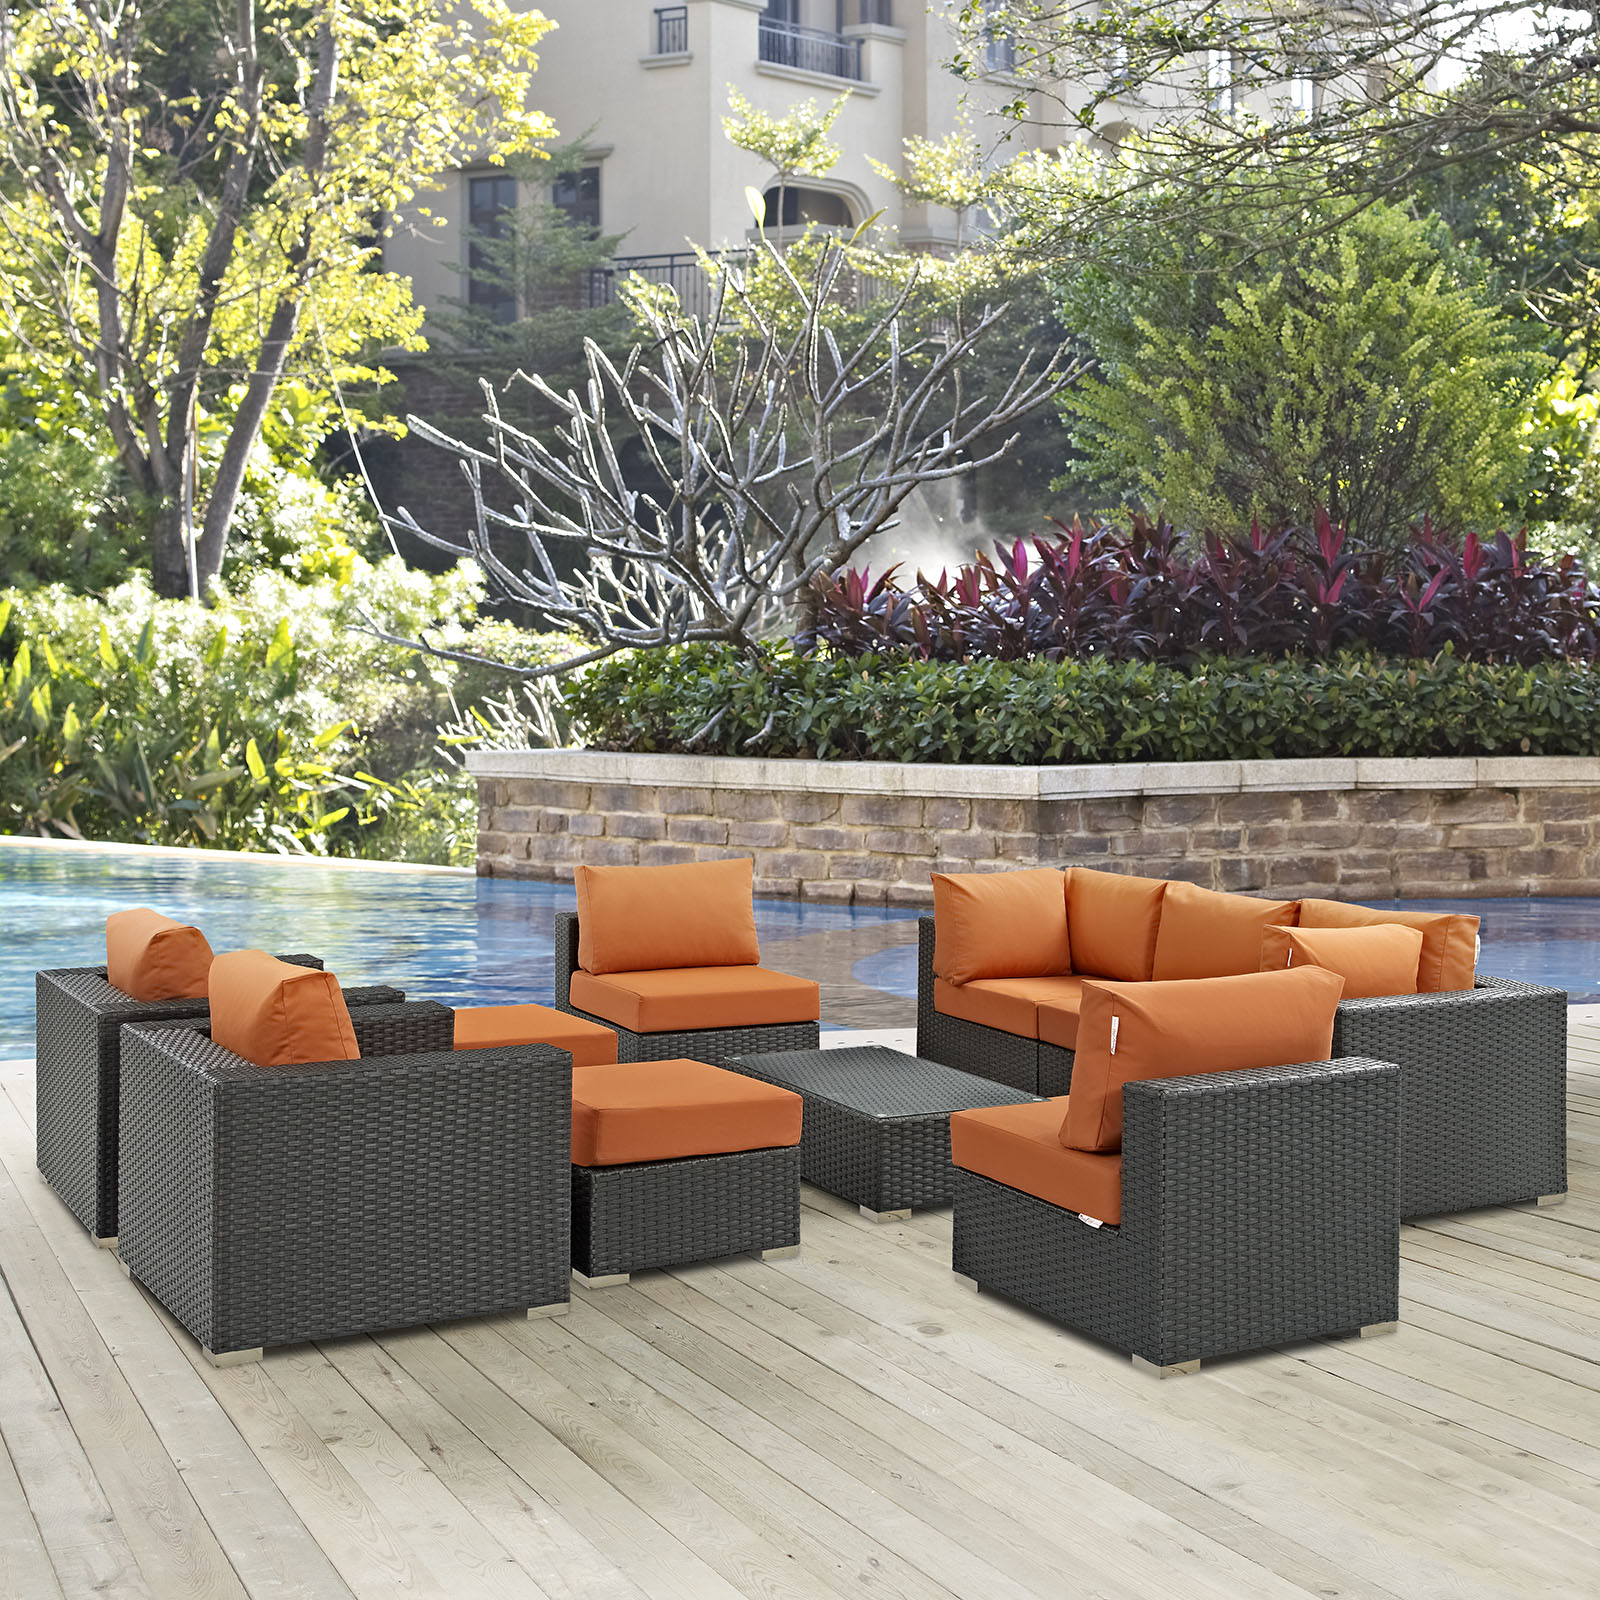 Modway Sojourn 10 Piece Outdoor Patio Sunbrella® Sectional Set in Canvas Tuscan - image 1 of 8